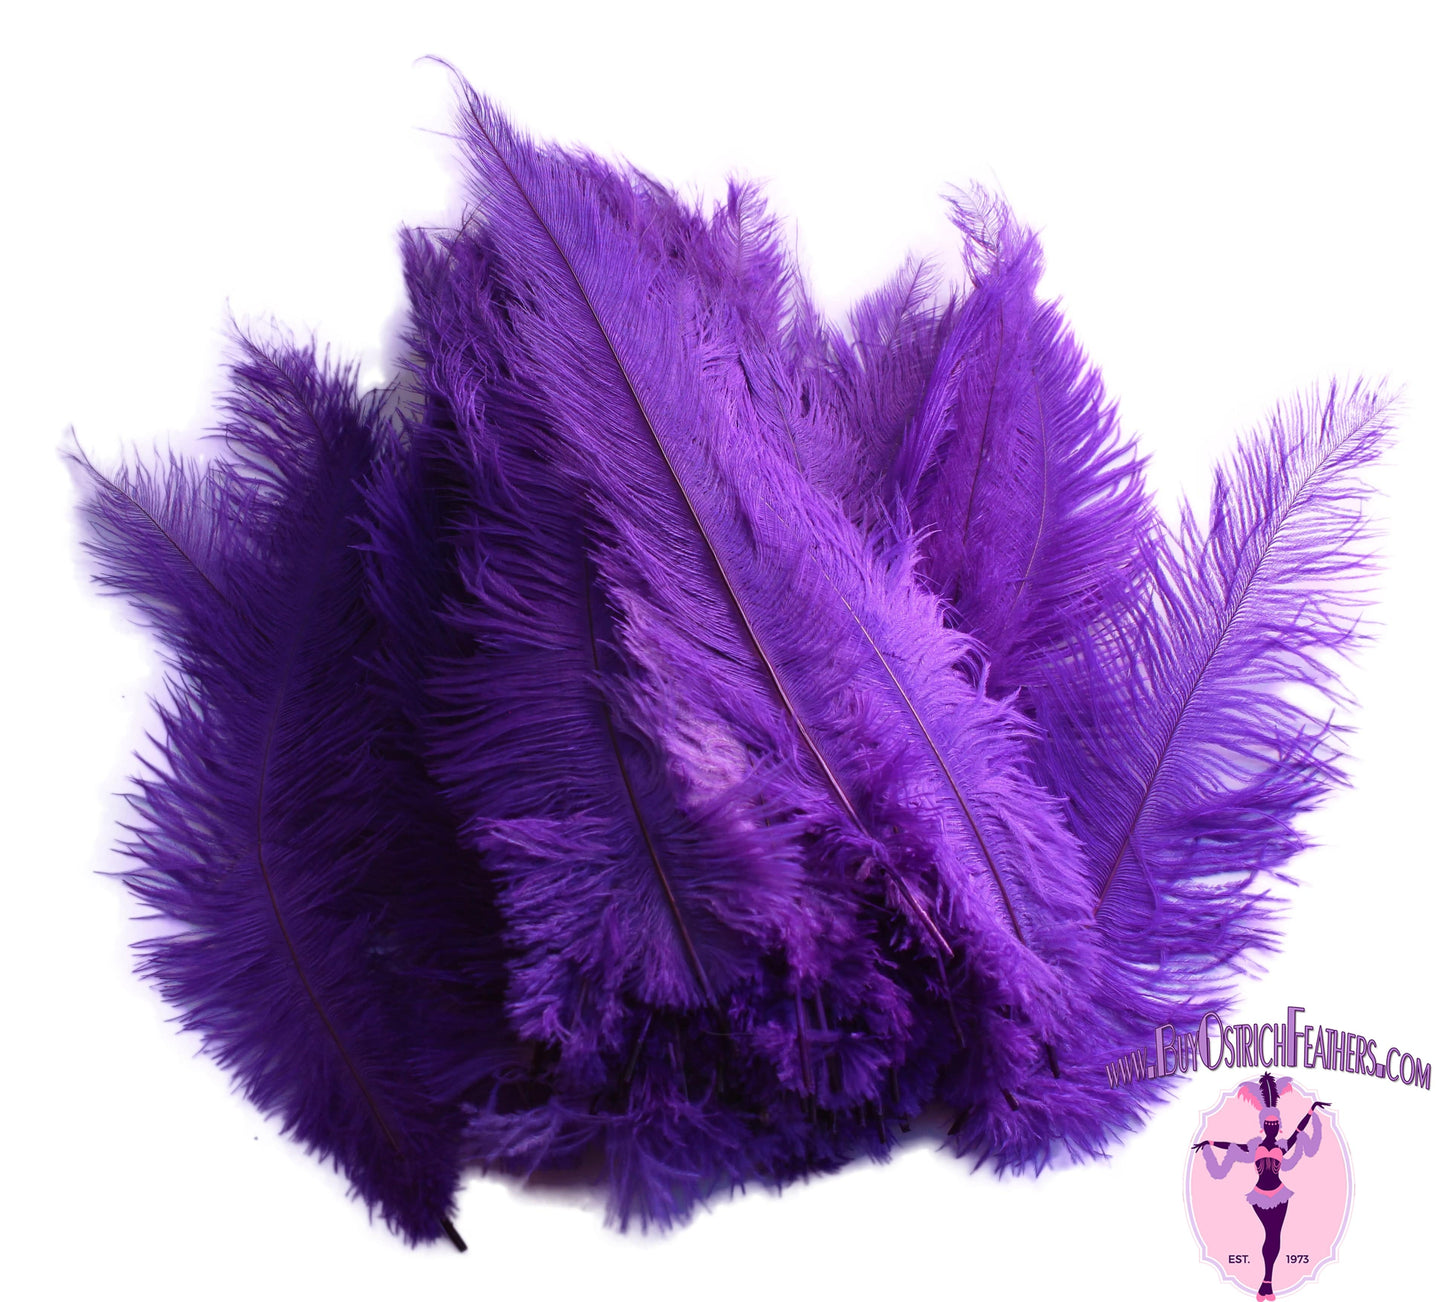 Ostrich Feather Spad Plumes 16-20" (Purple) - Buy Ostrich Feathers